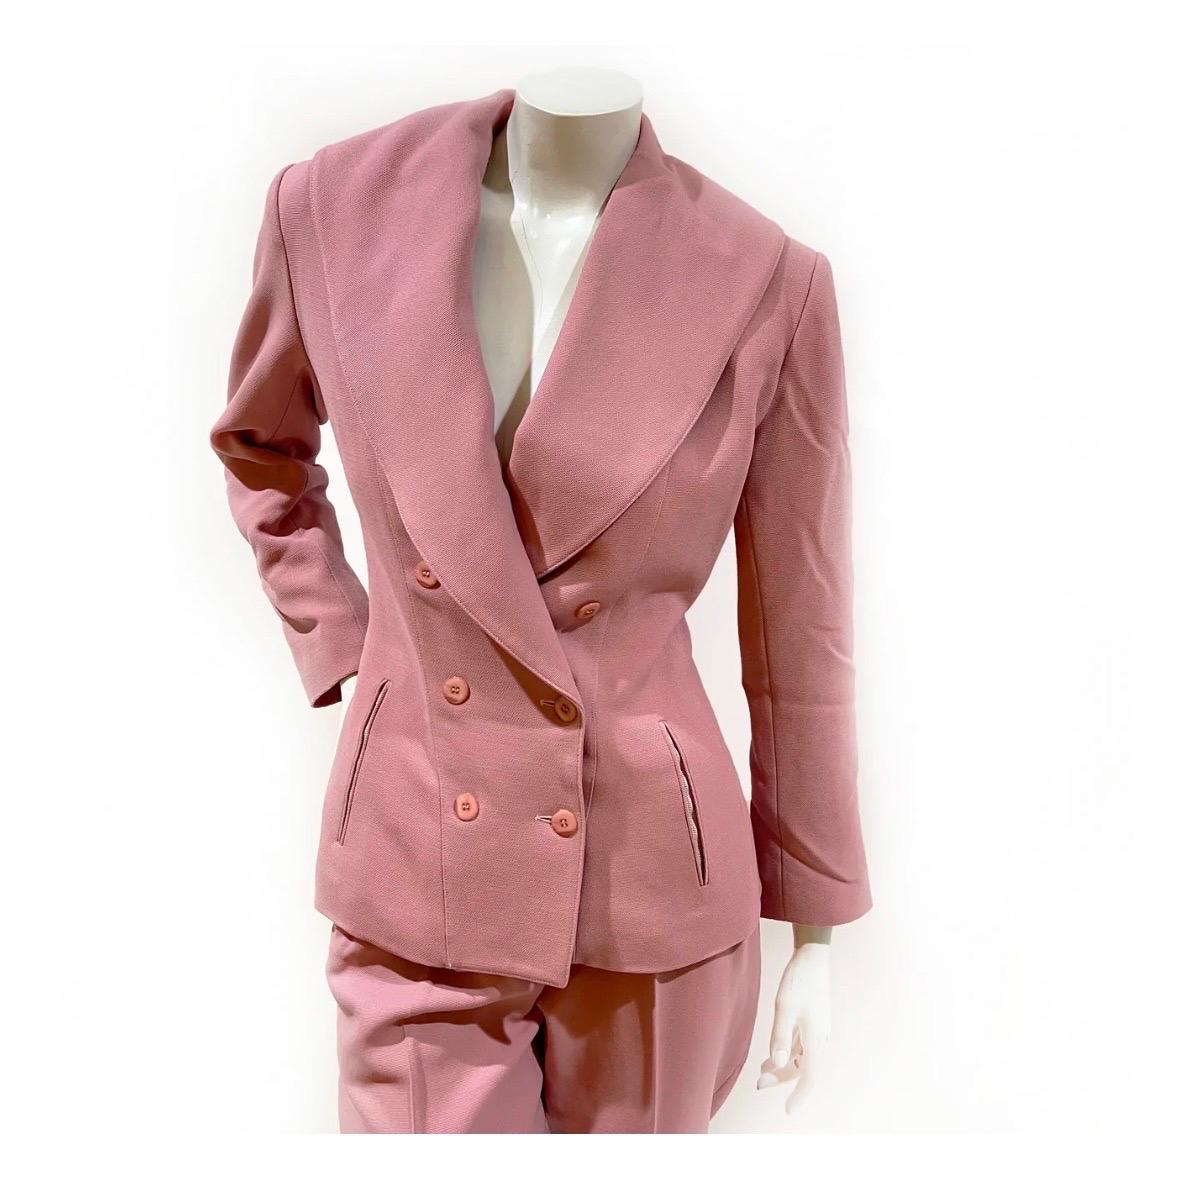 Pink Pantsuit by Azzedine Alaia
Made in France
Circa 1990
Double breasted jacket 
High waisted, pleated pant
Dual zip pockets on jacket and pants 
100% Wool (Lining: 57% viscose 43% acetate)
Excellent condition, preloved with no visible wear